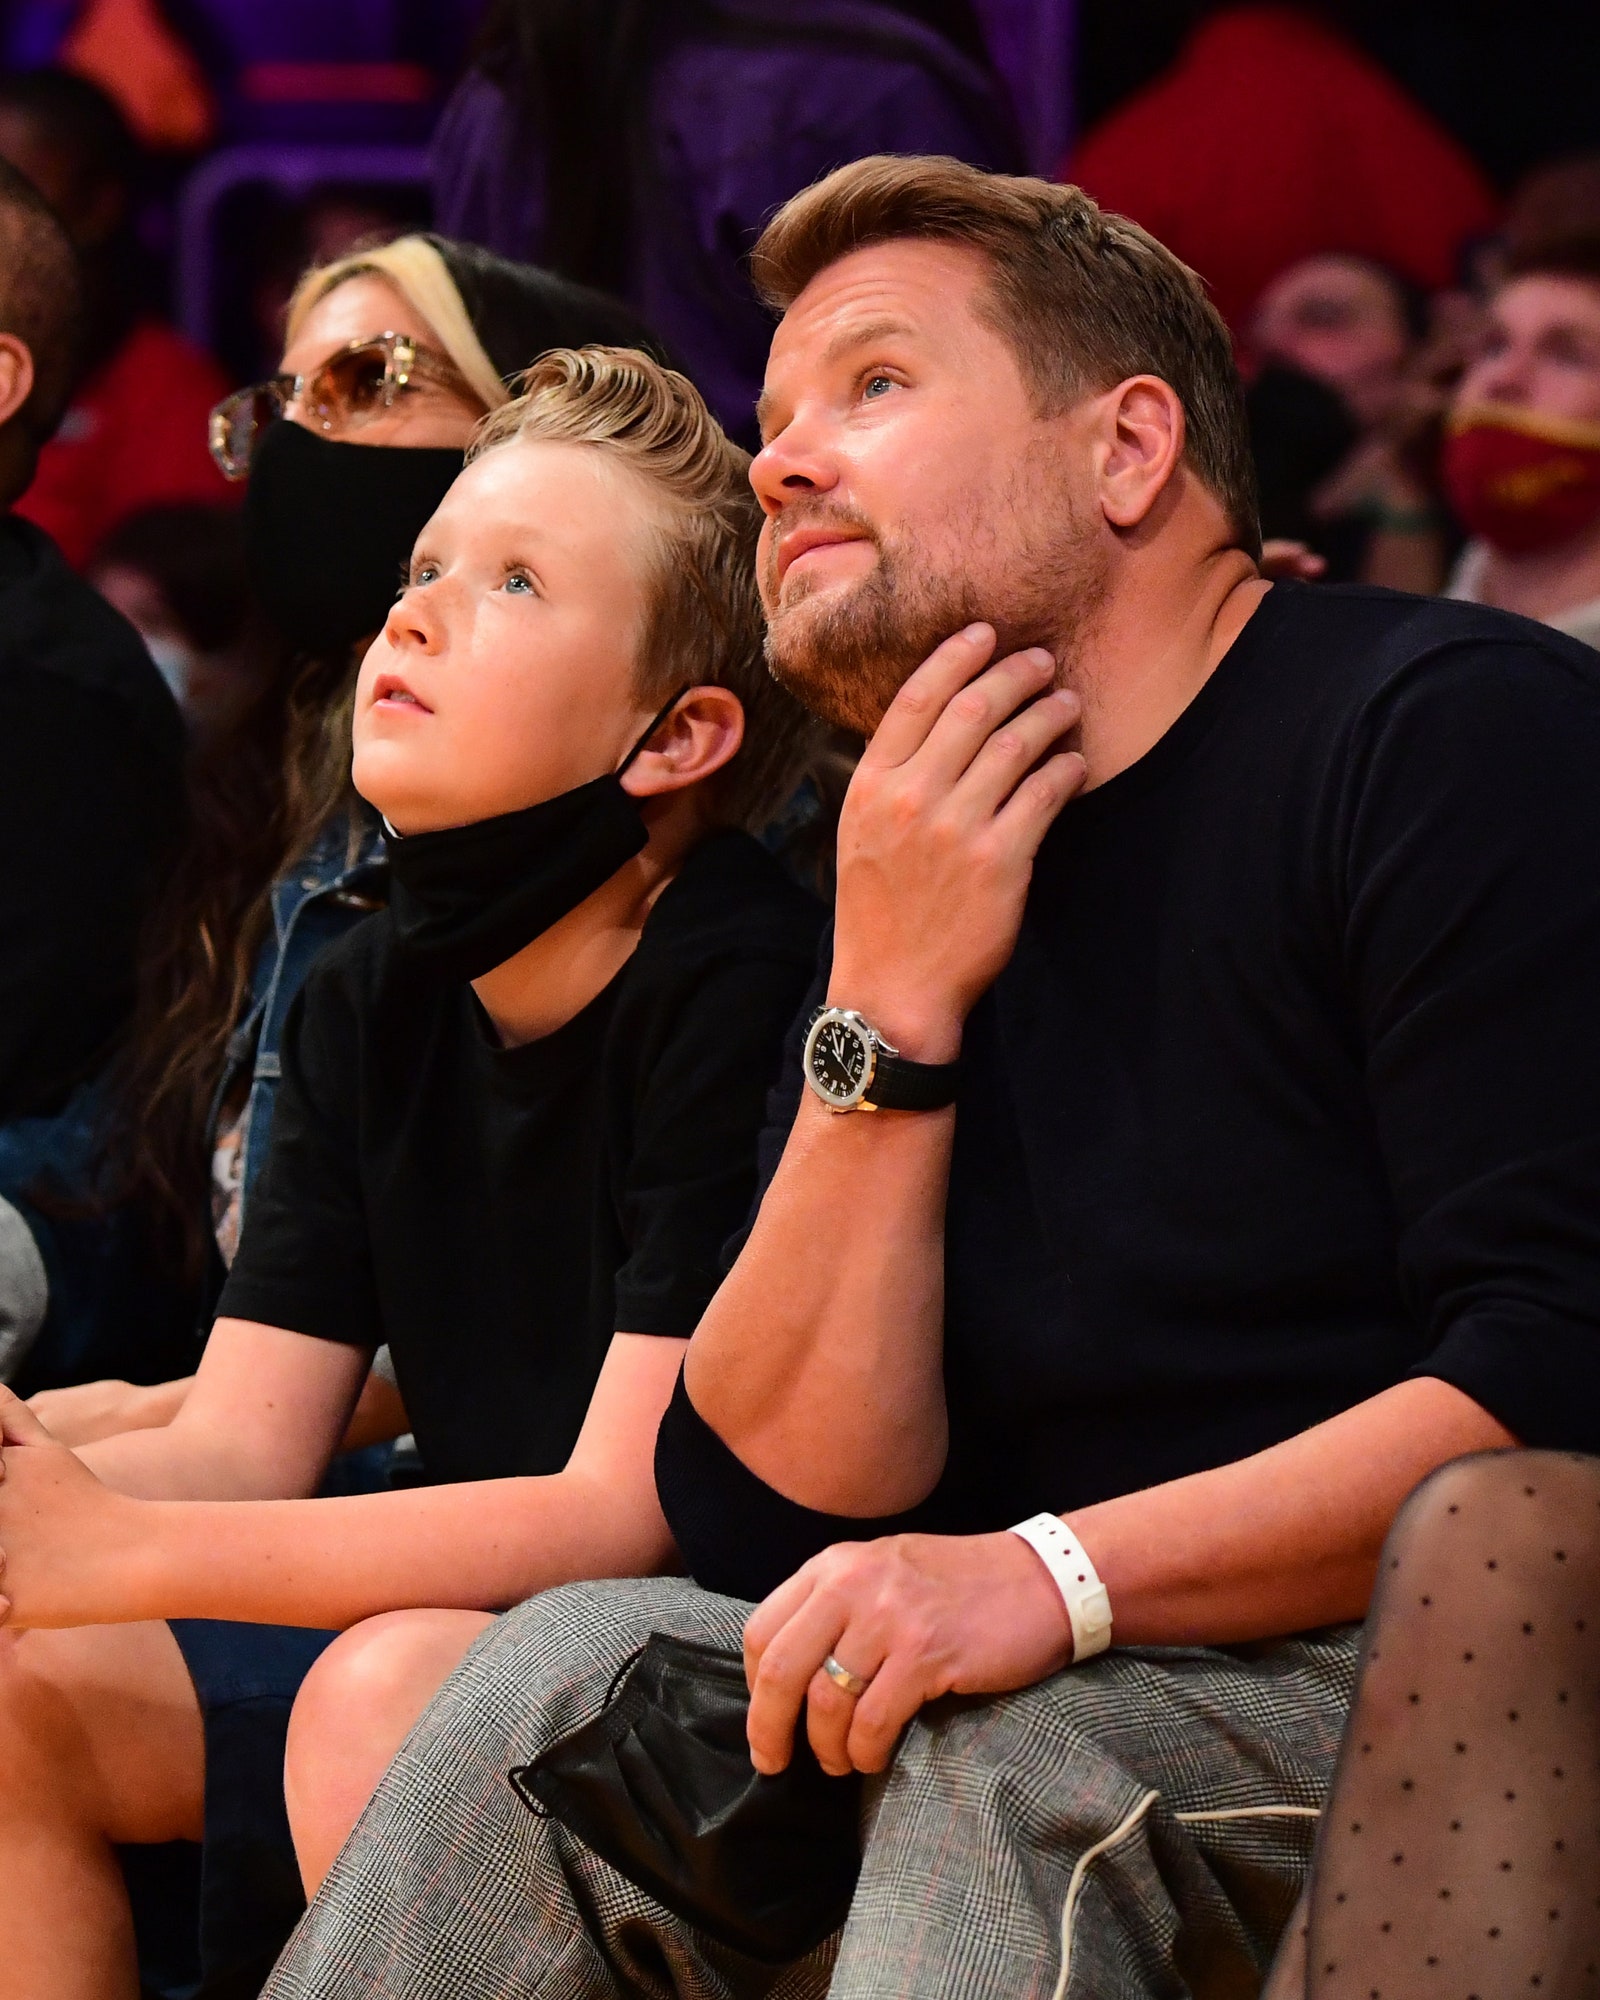 James Corden attends a game between the Golden State Warriors and the Los Angeles Lakers